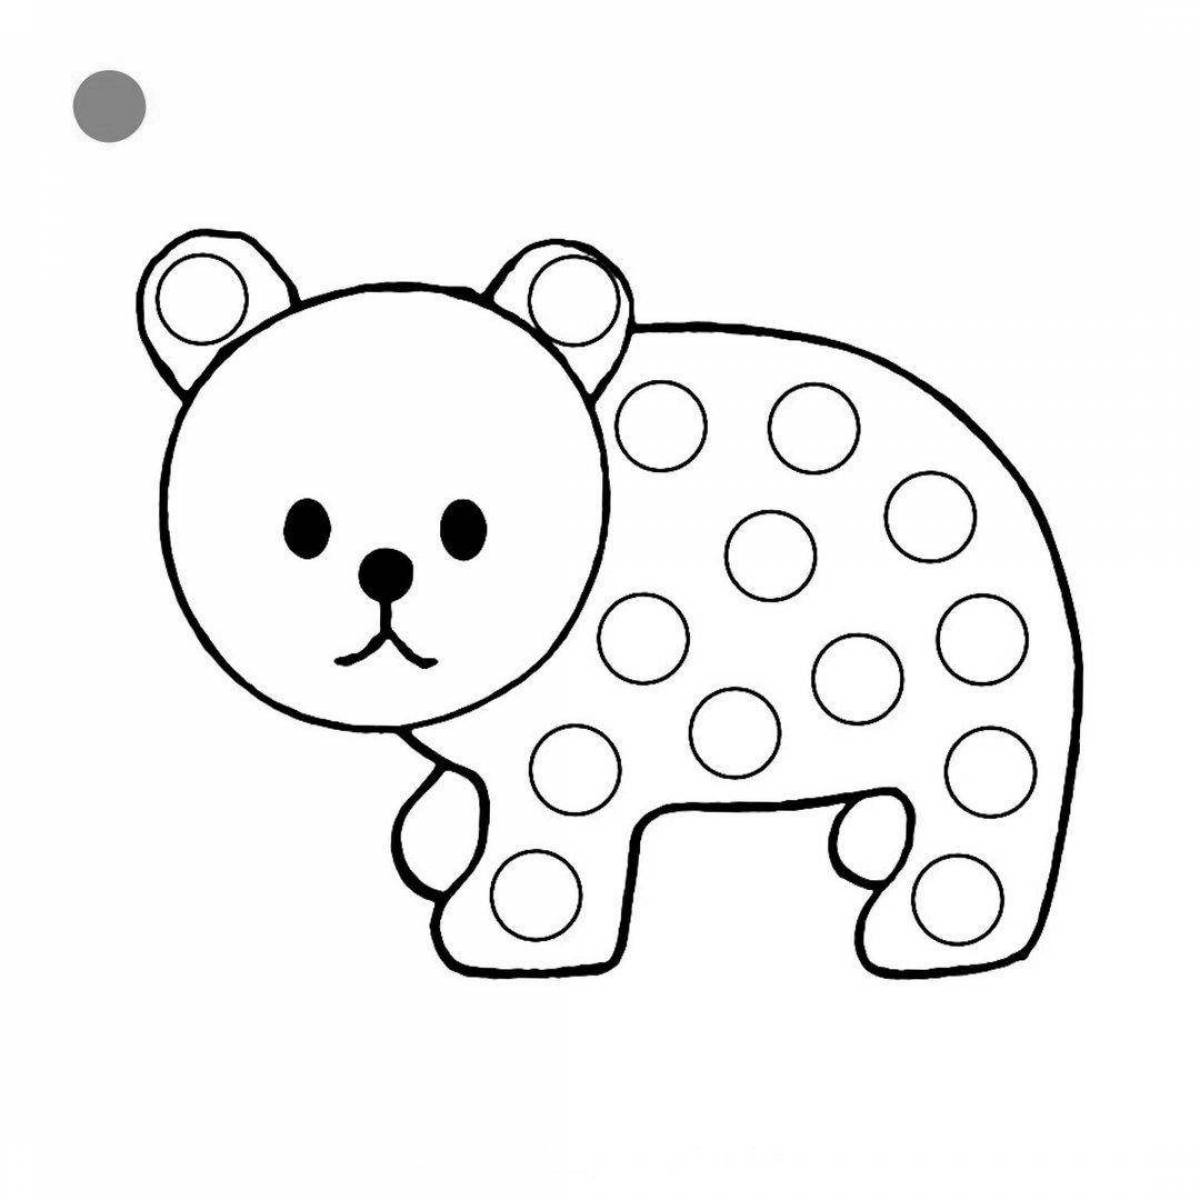 Adorable finger coloring page for kids